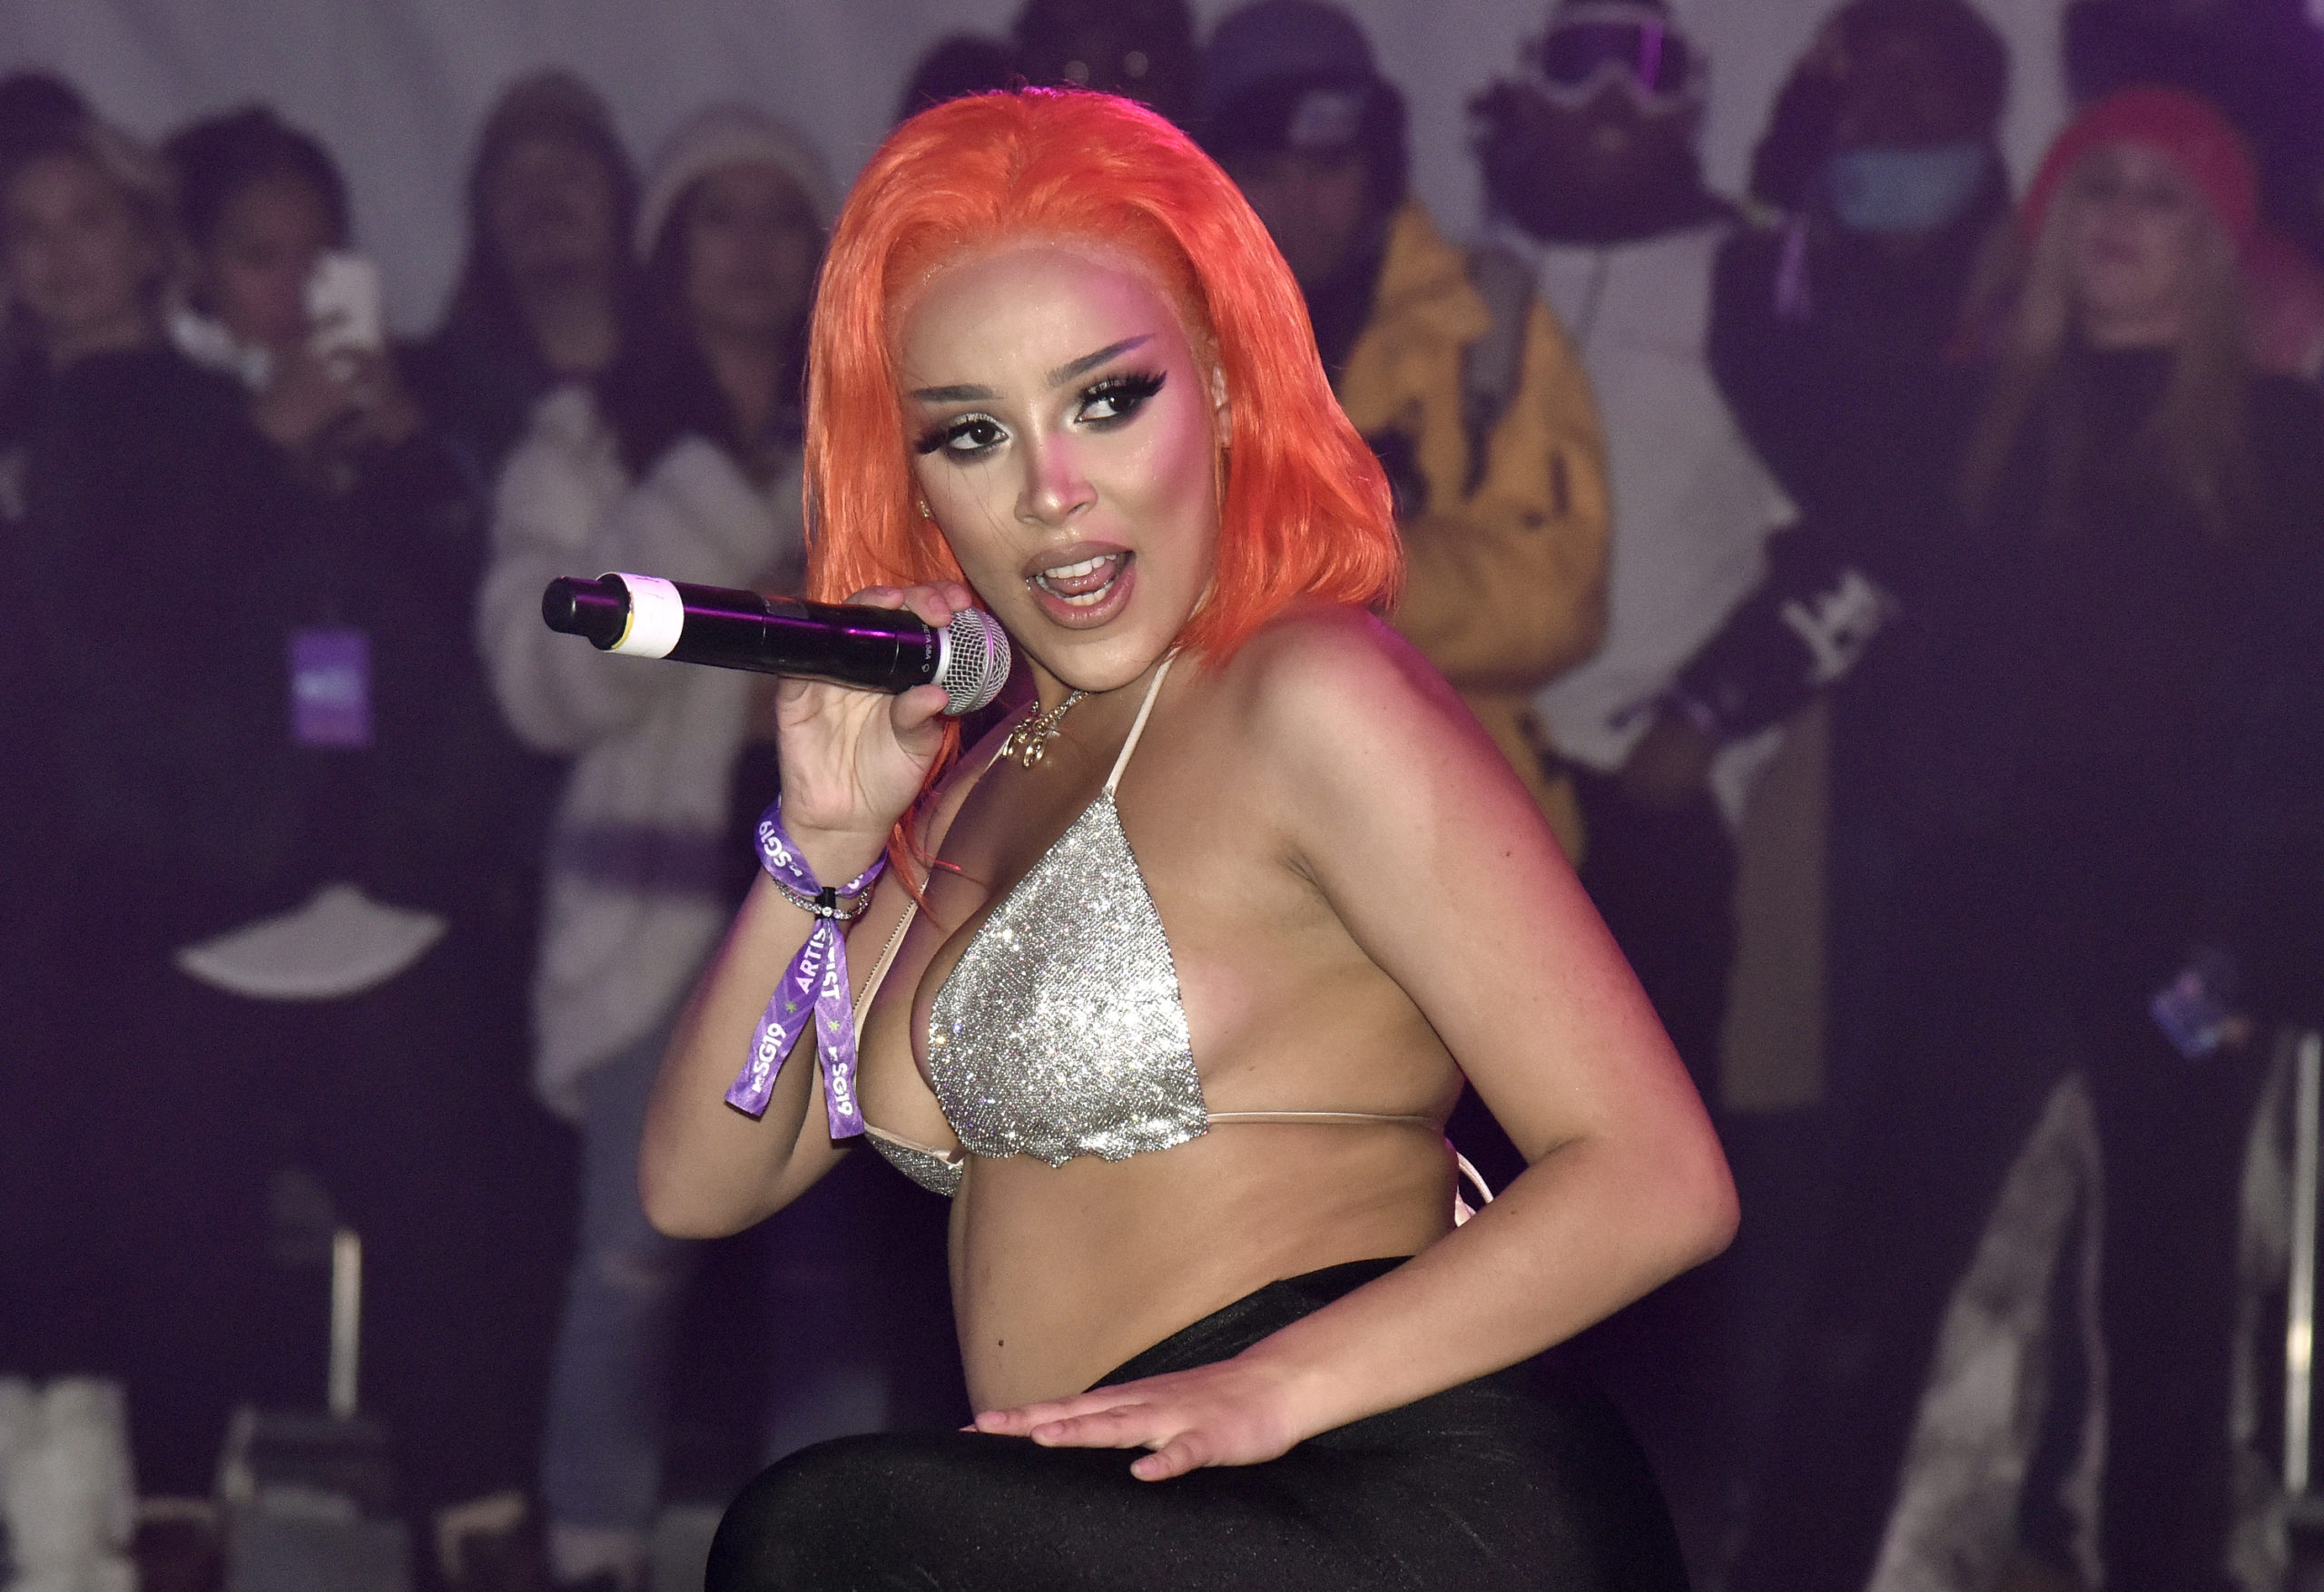 DojaCatIsOverParty Explained: Doja Cat Accused of Being Racist